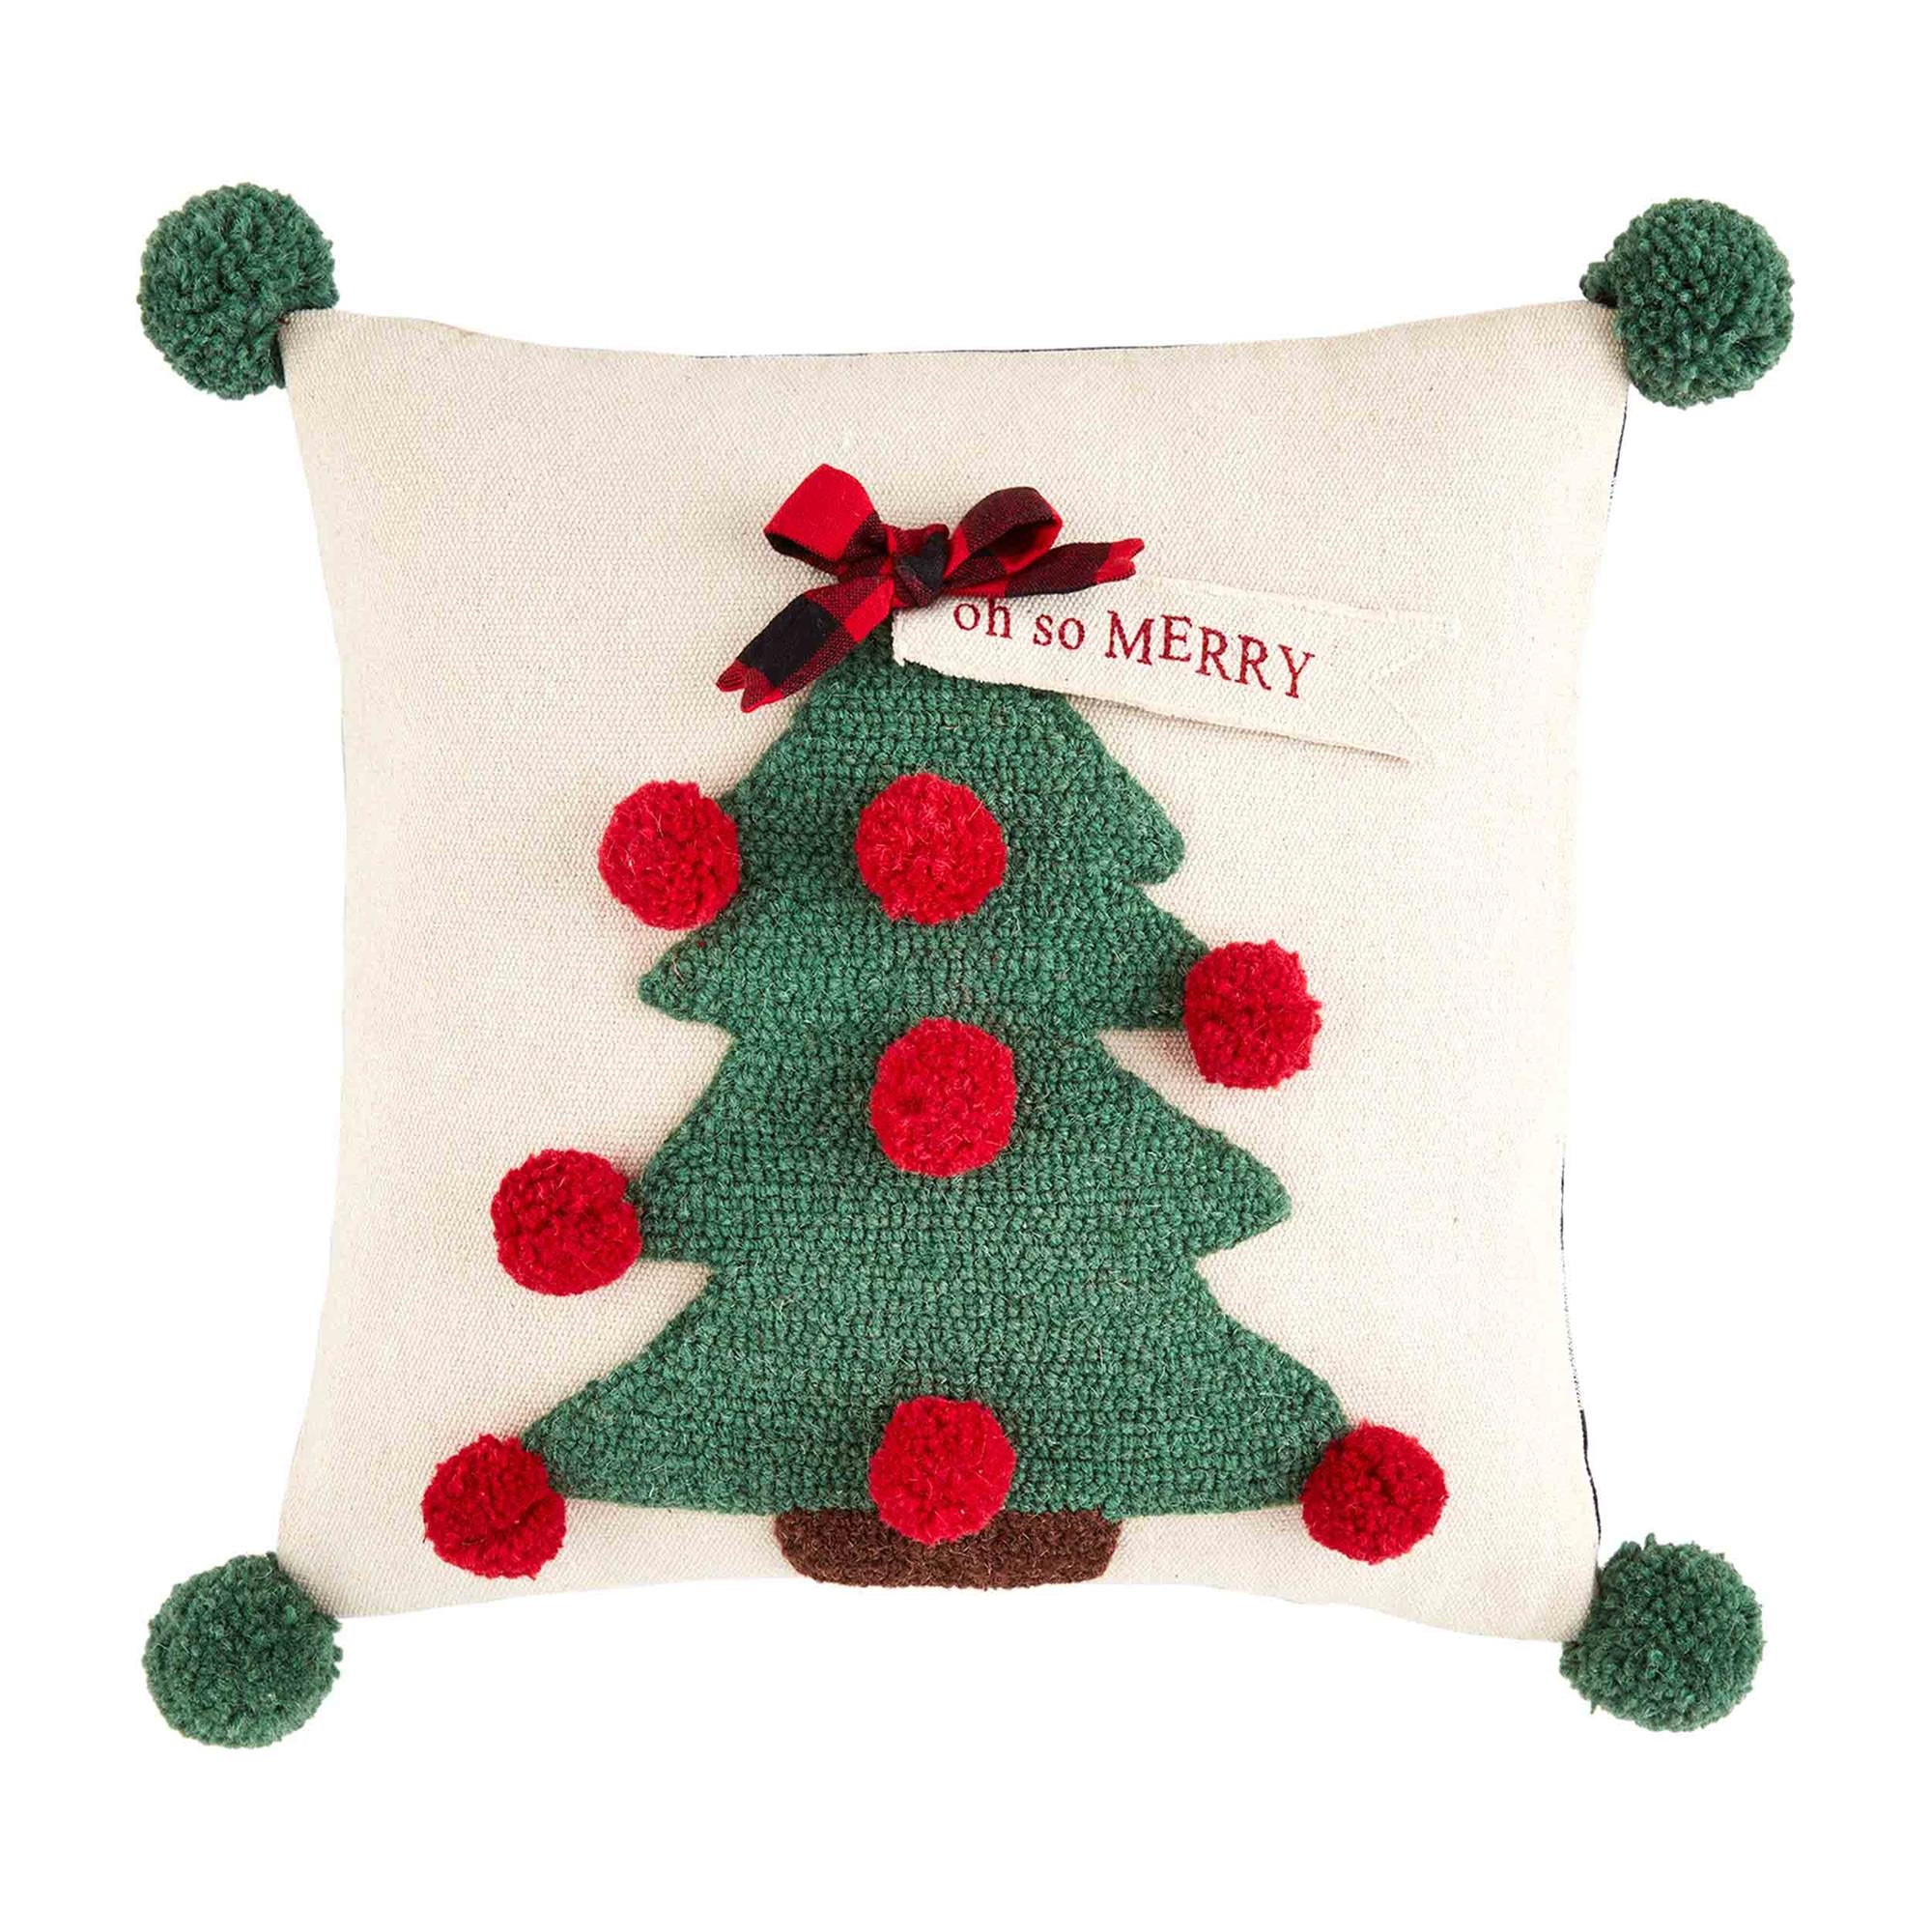 Oh So Merry Hook Check Pillow